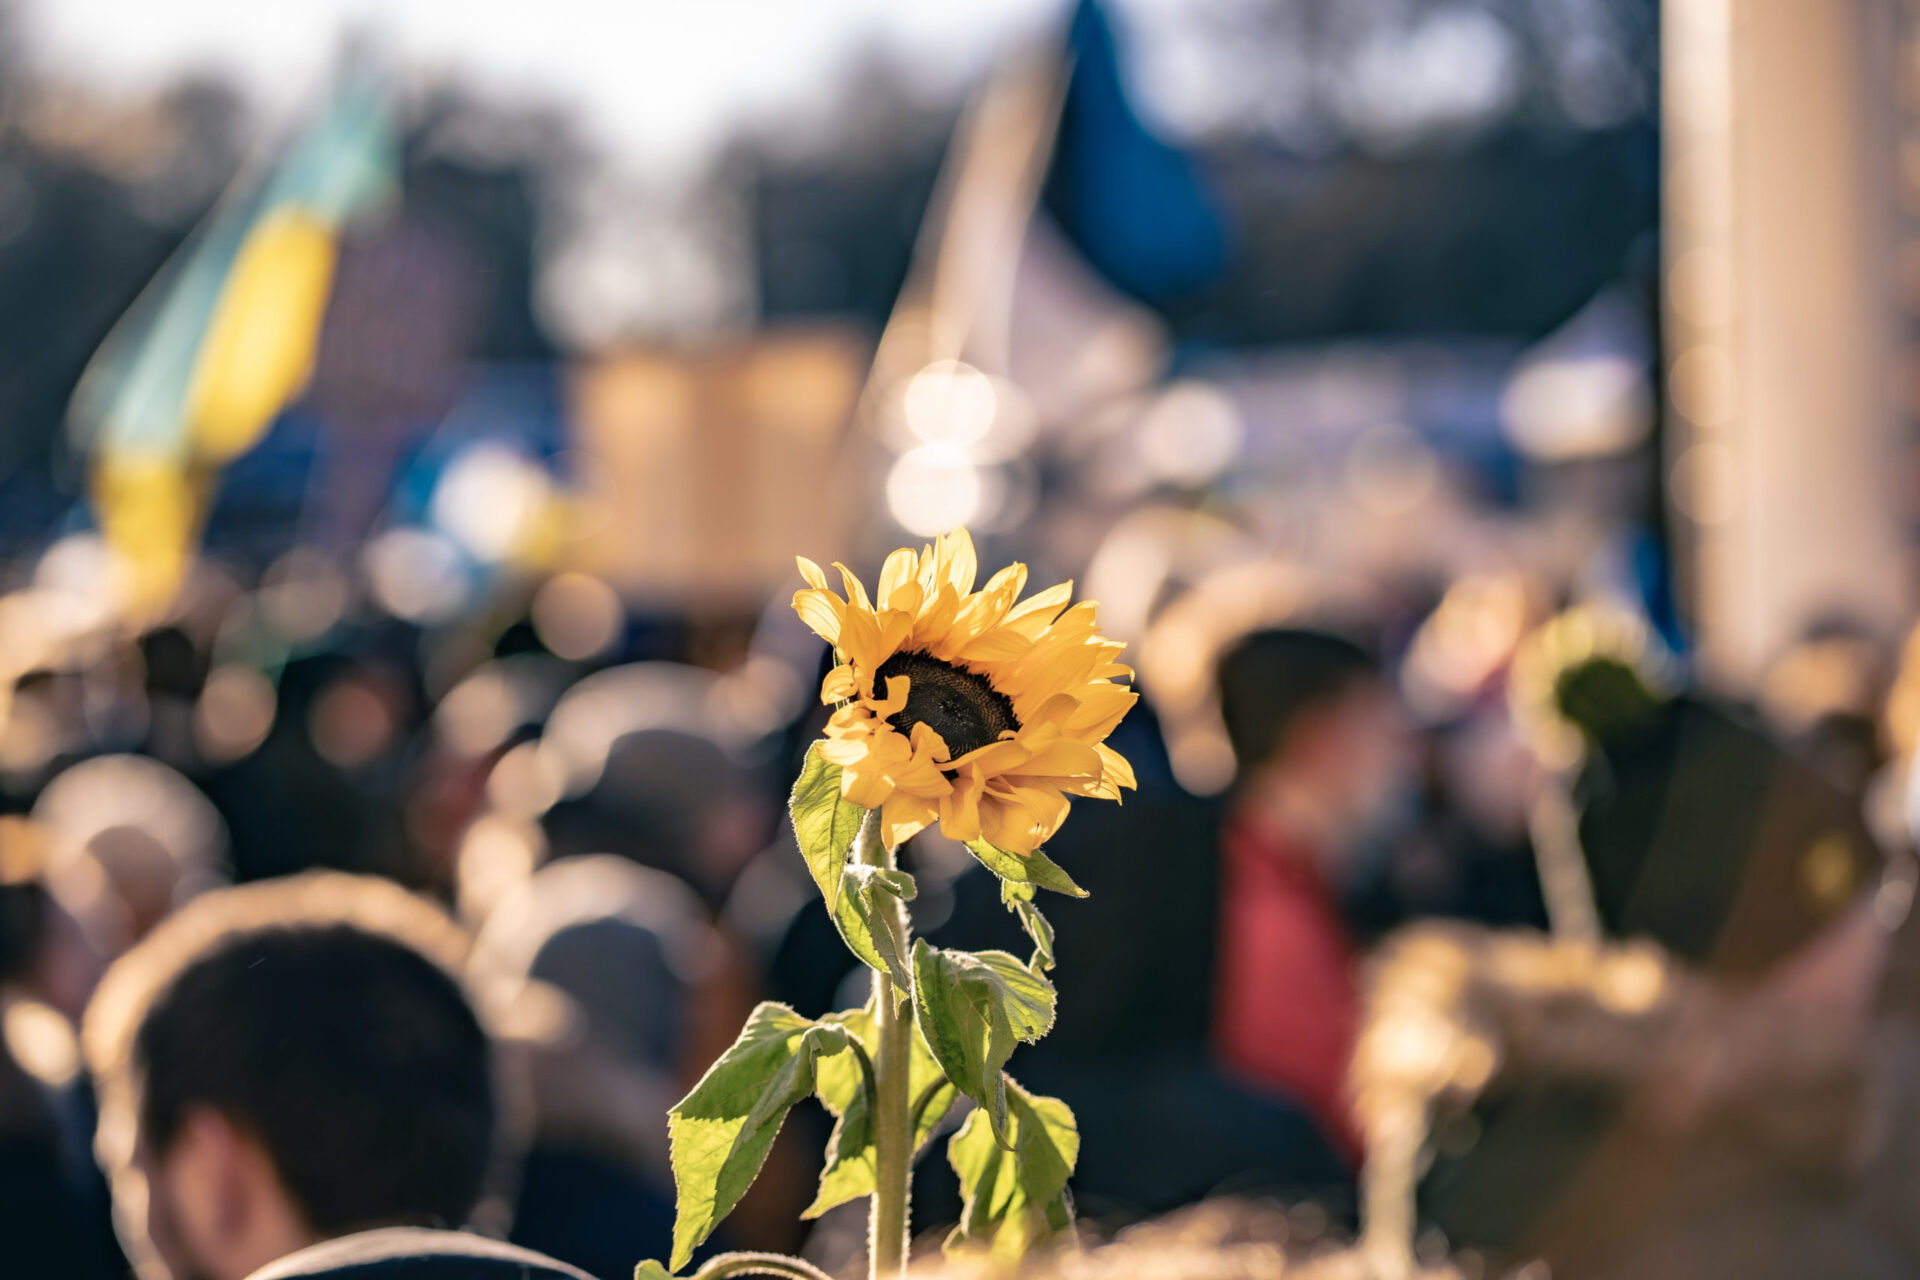 Sunflower at a peace protest